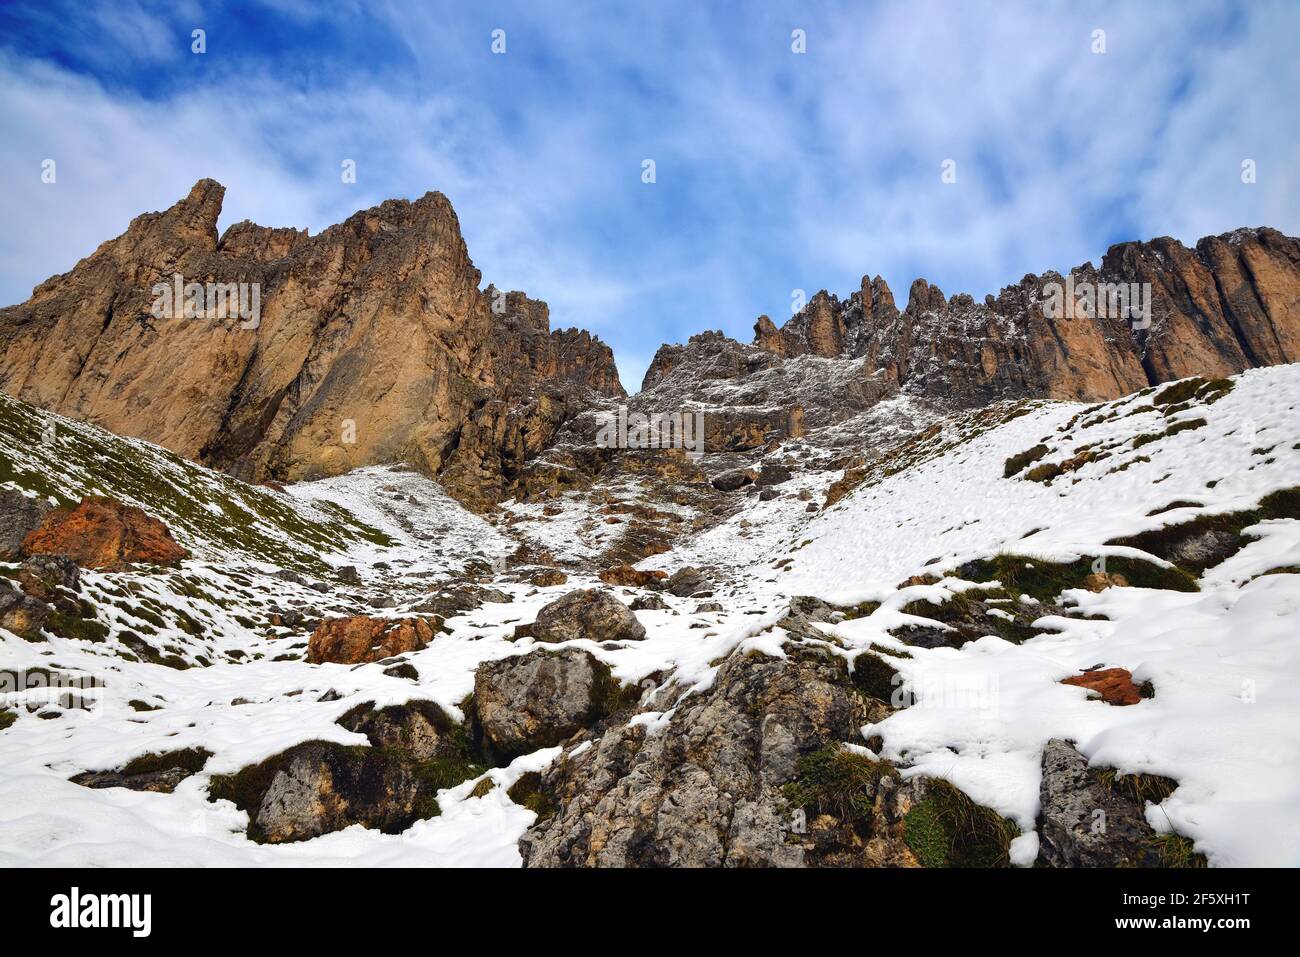 Mountain group Sassolungo (Langkofel). Beautiful snowy winter landscape in Dolomites. Province of Trento, South Tyrol, Italy. Stock Photo